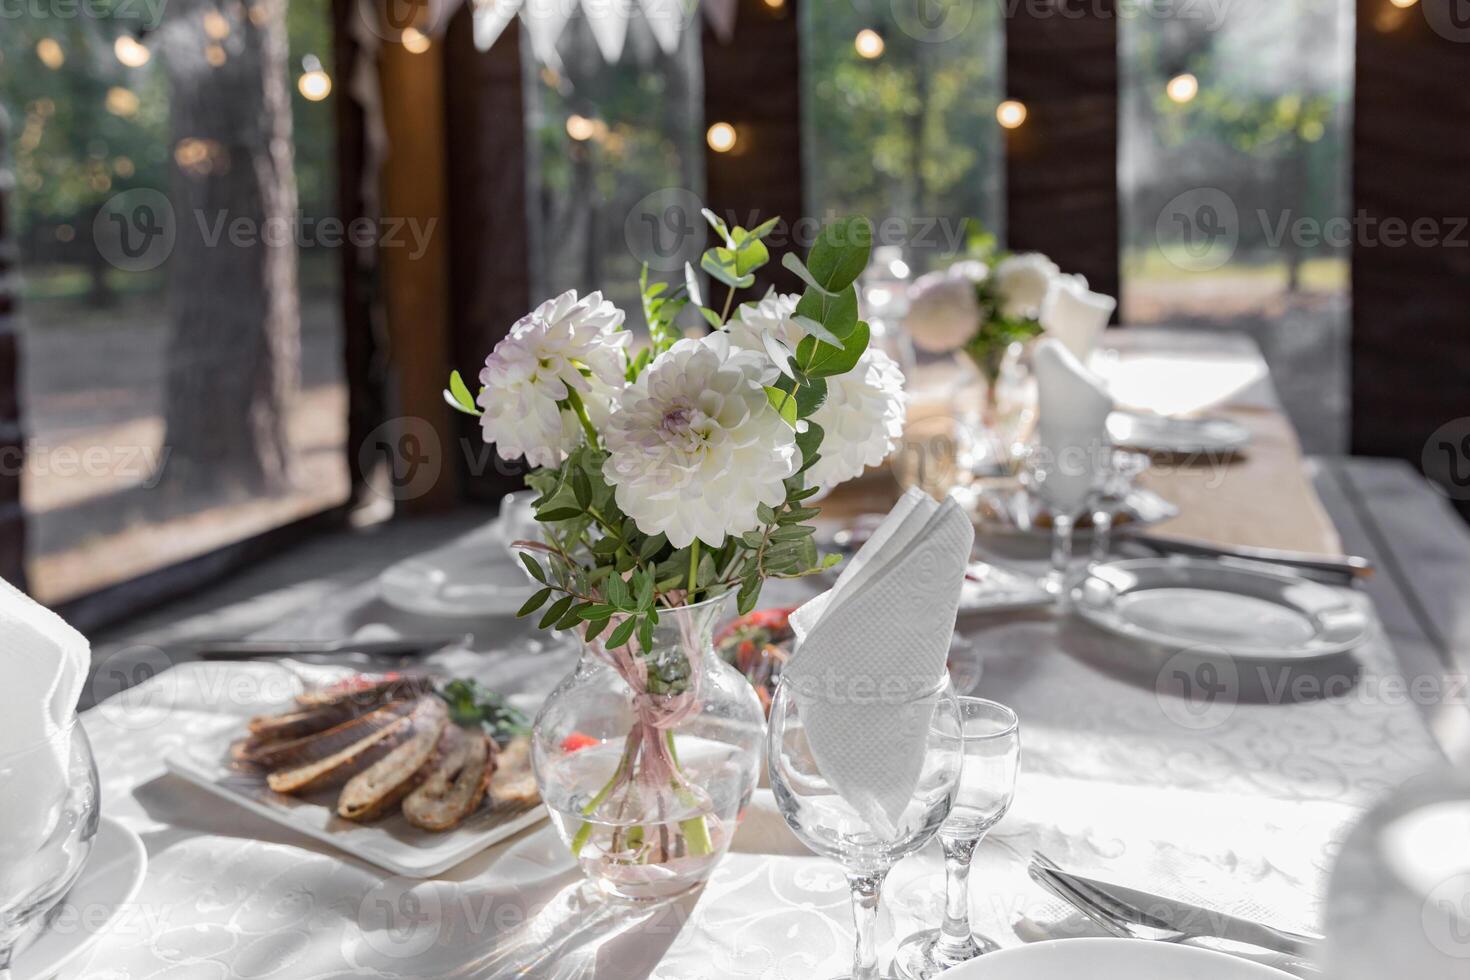 A long festive table decorated with white flowers and greenery. There are plates, glasses and candles on the table. The room is decorated with white garlands. photo